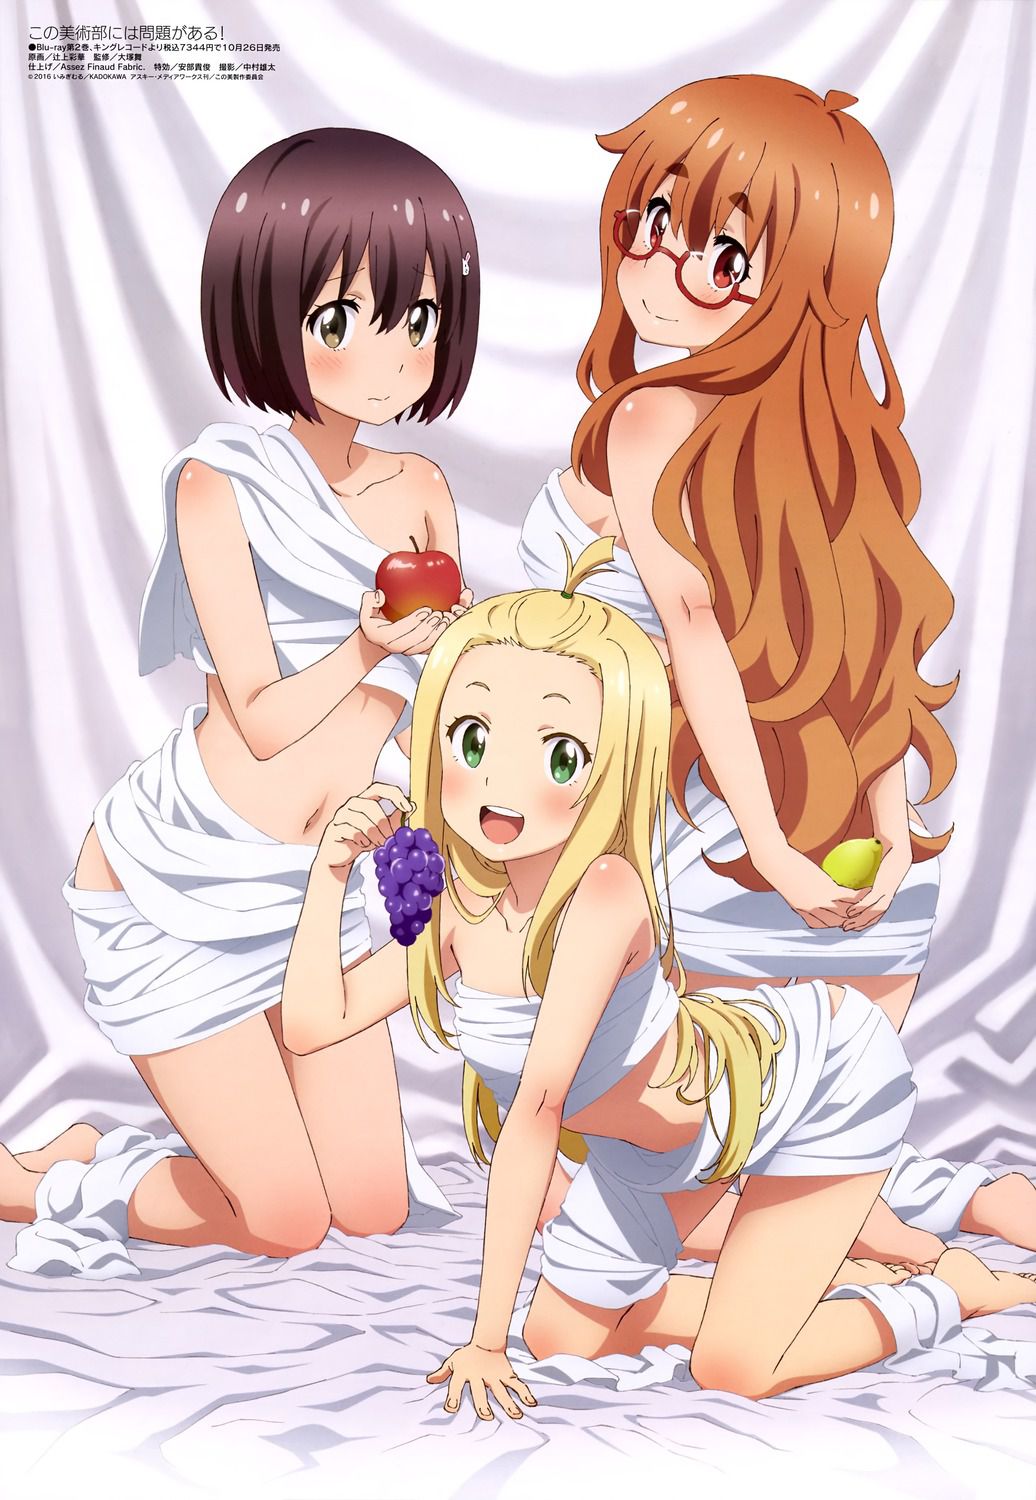 [Image] the latest pin-up girl anime such as sword online erotic babe too wwwwwwwww 3